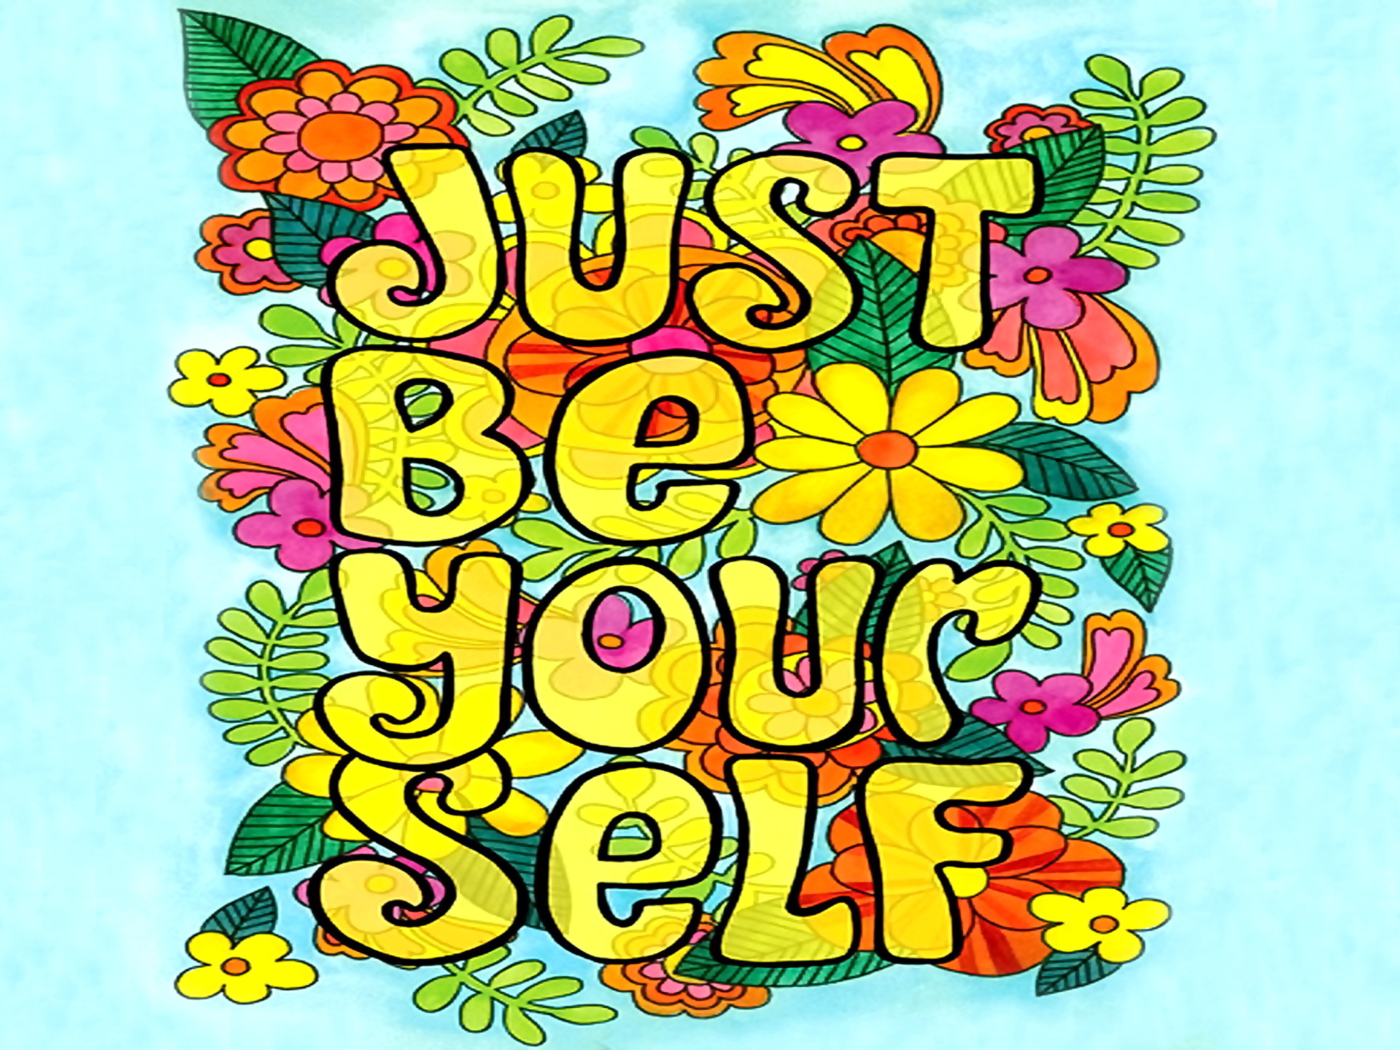 Das Just Be Yourself Wallpaper 1400x1050